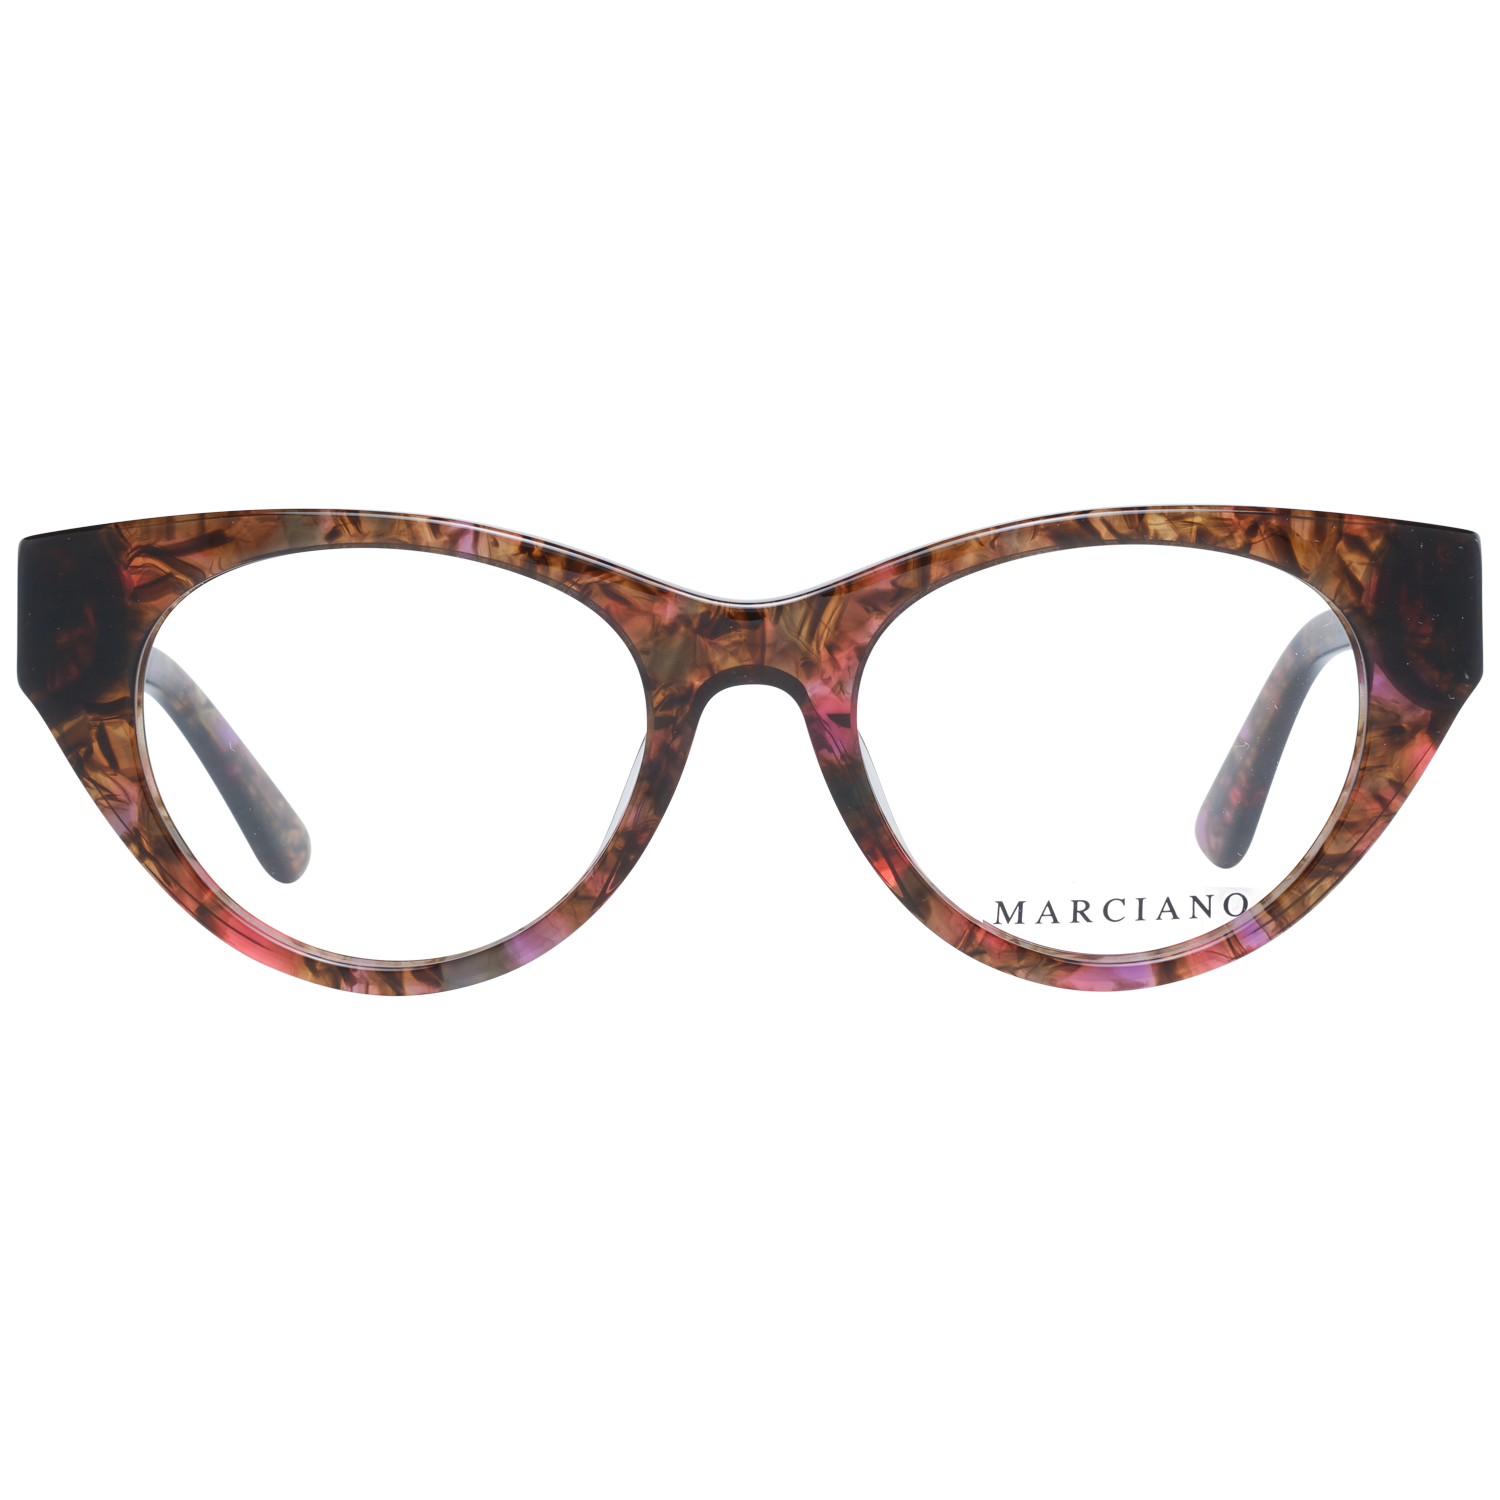 Marciano by Guess Frames Marciano by Guess Glasses Frames GM0362-S 074 49 Eyeglasses Eyewear UK USA Australia 